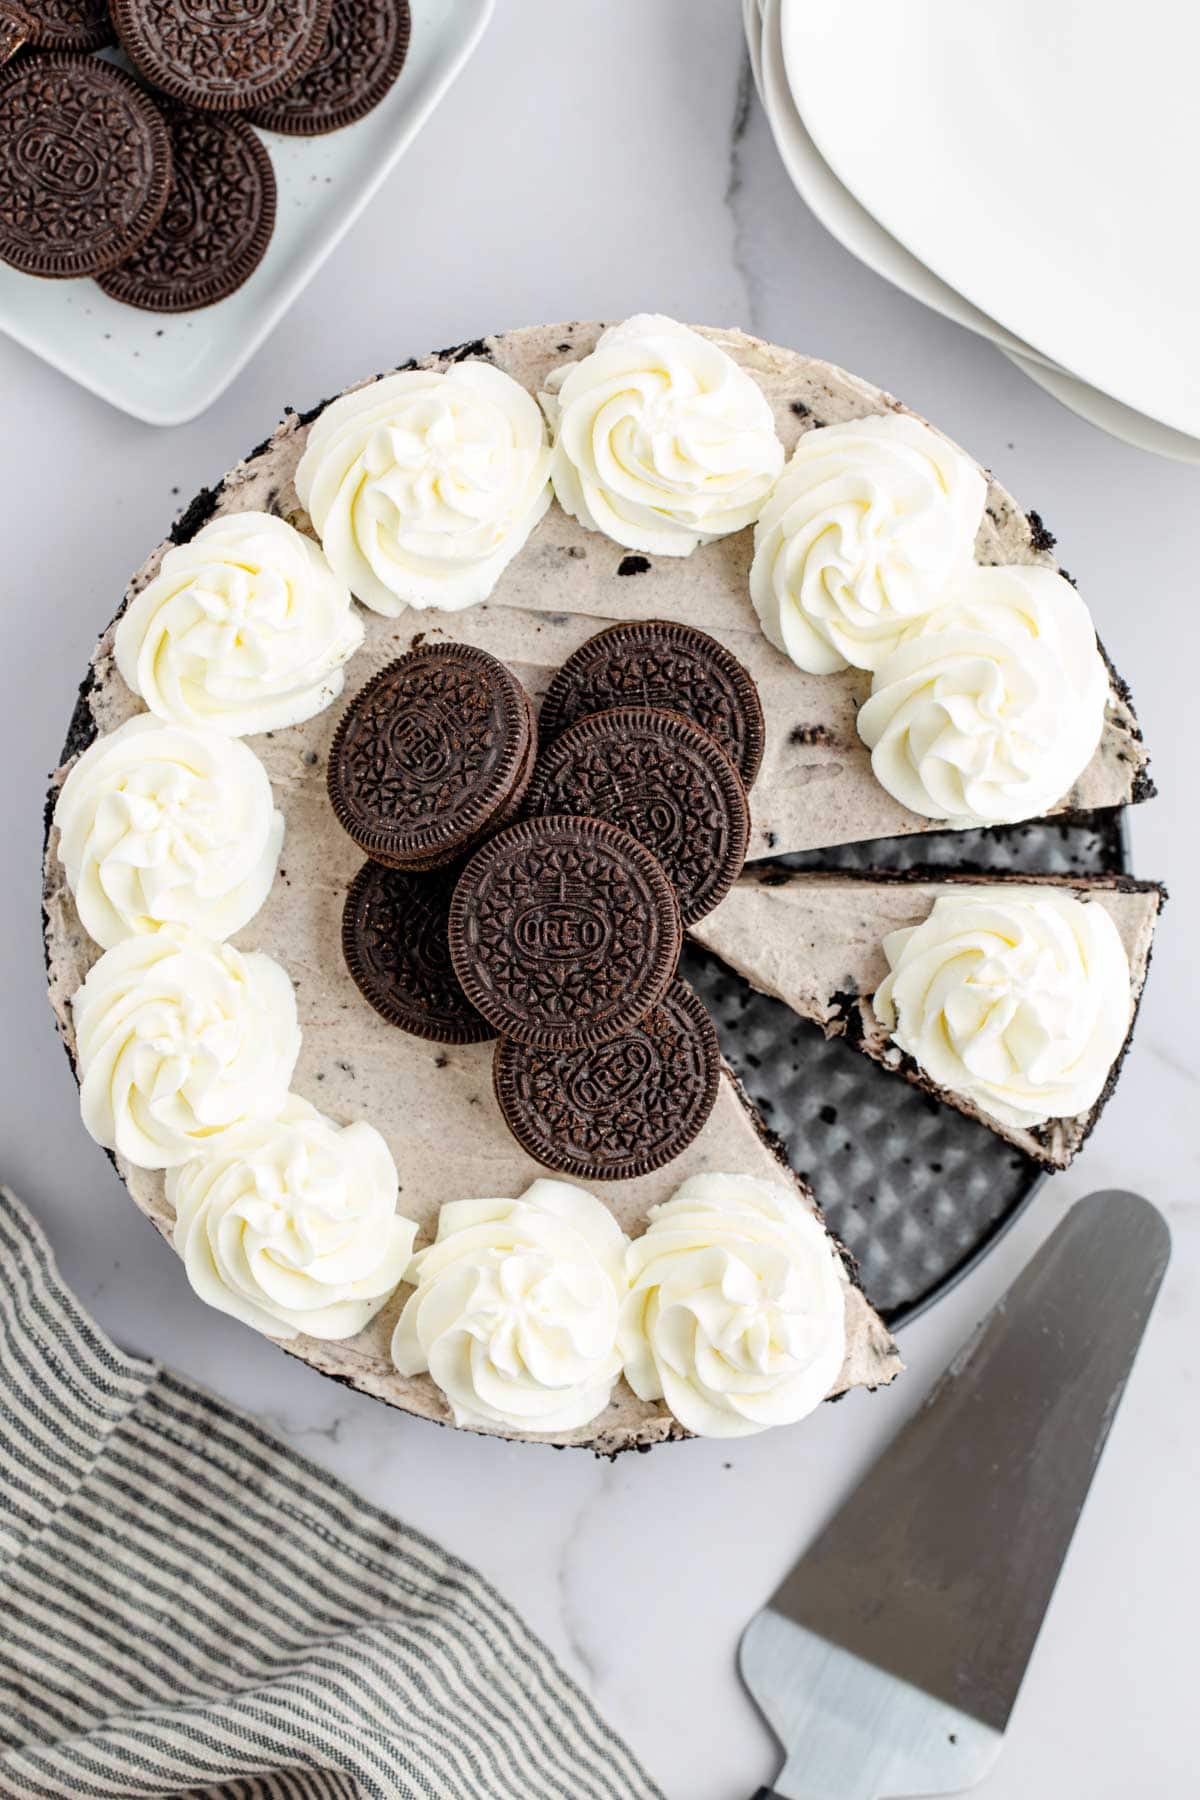 An overhead image of a whole no bake oreo cheesecake with a slice removed.